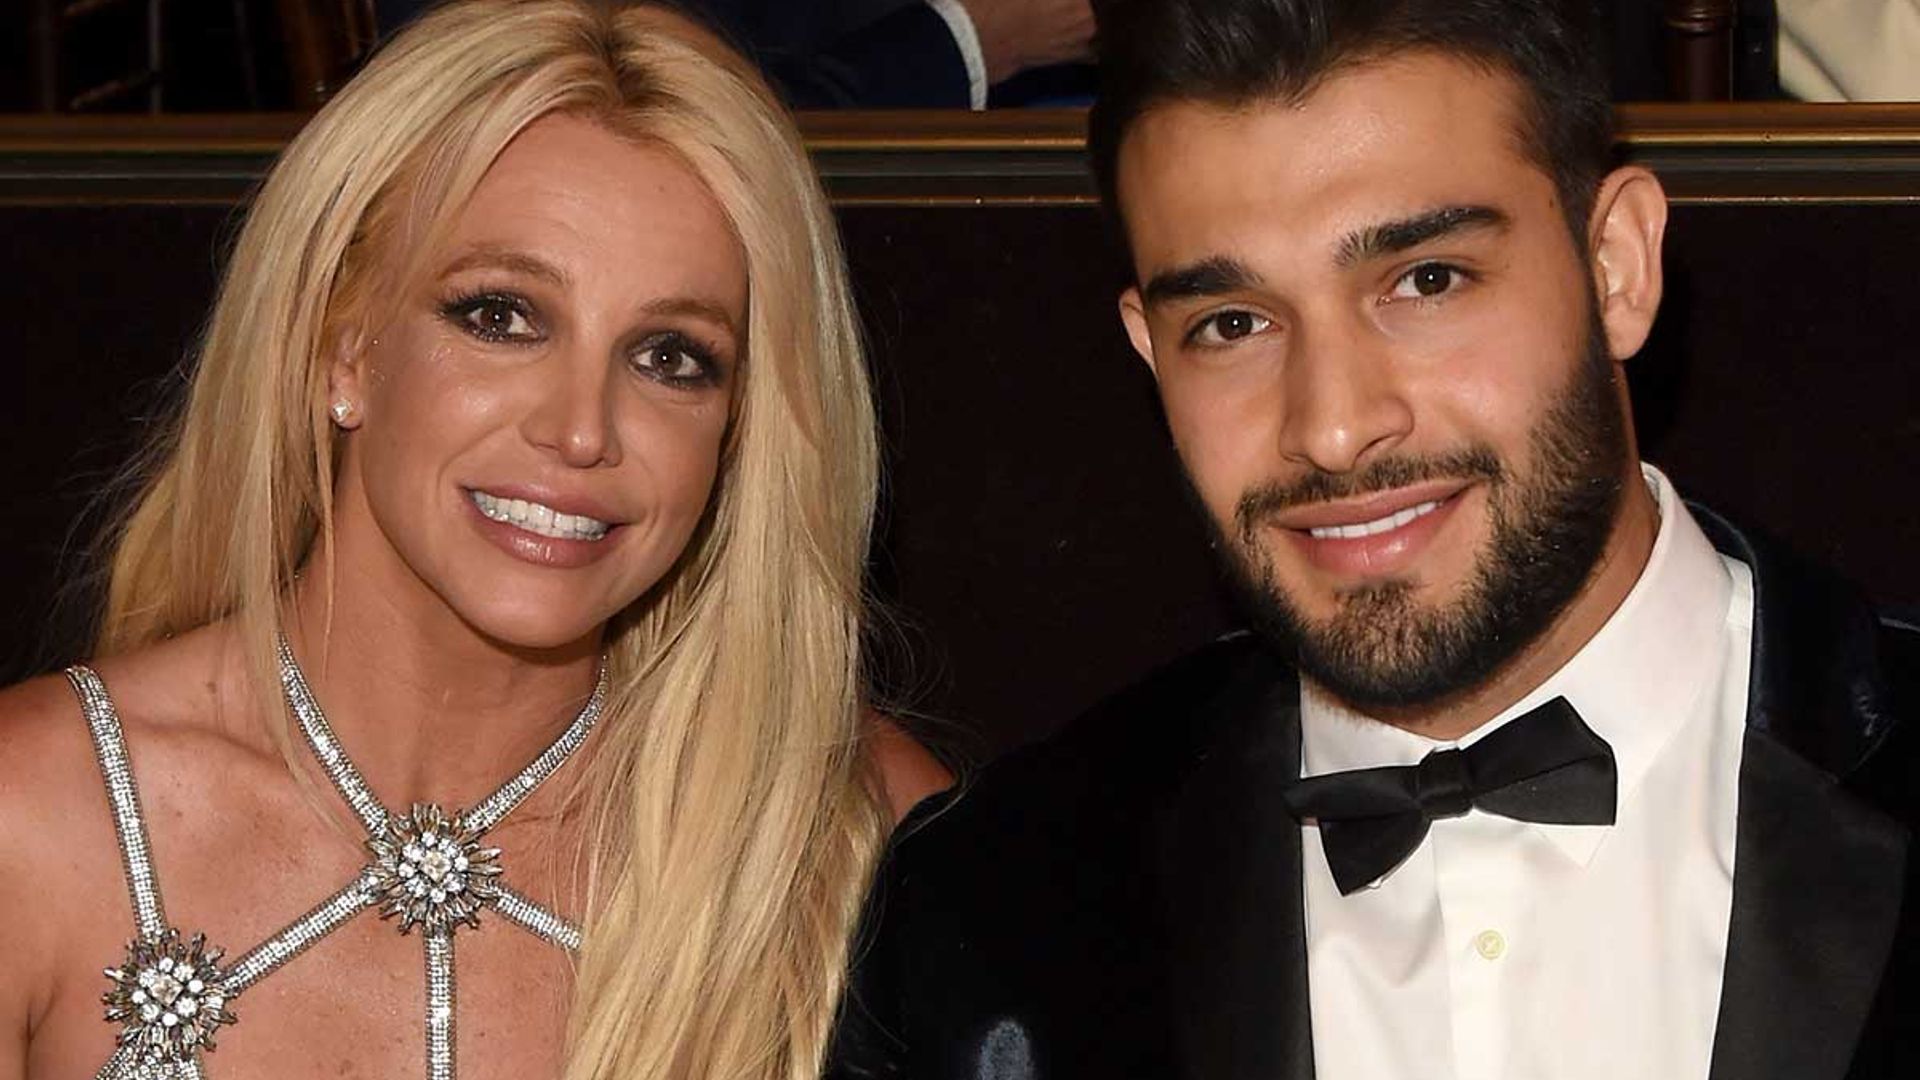 Britney Spears stuns in nude strapless gown for exciting wedding dress reveal